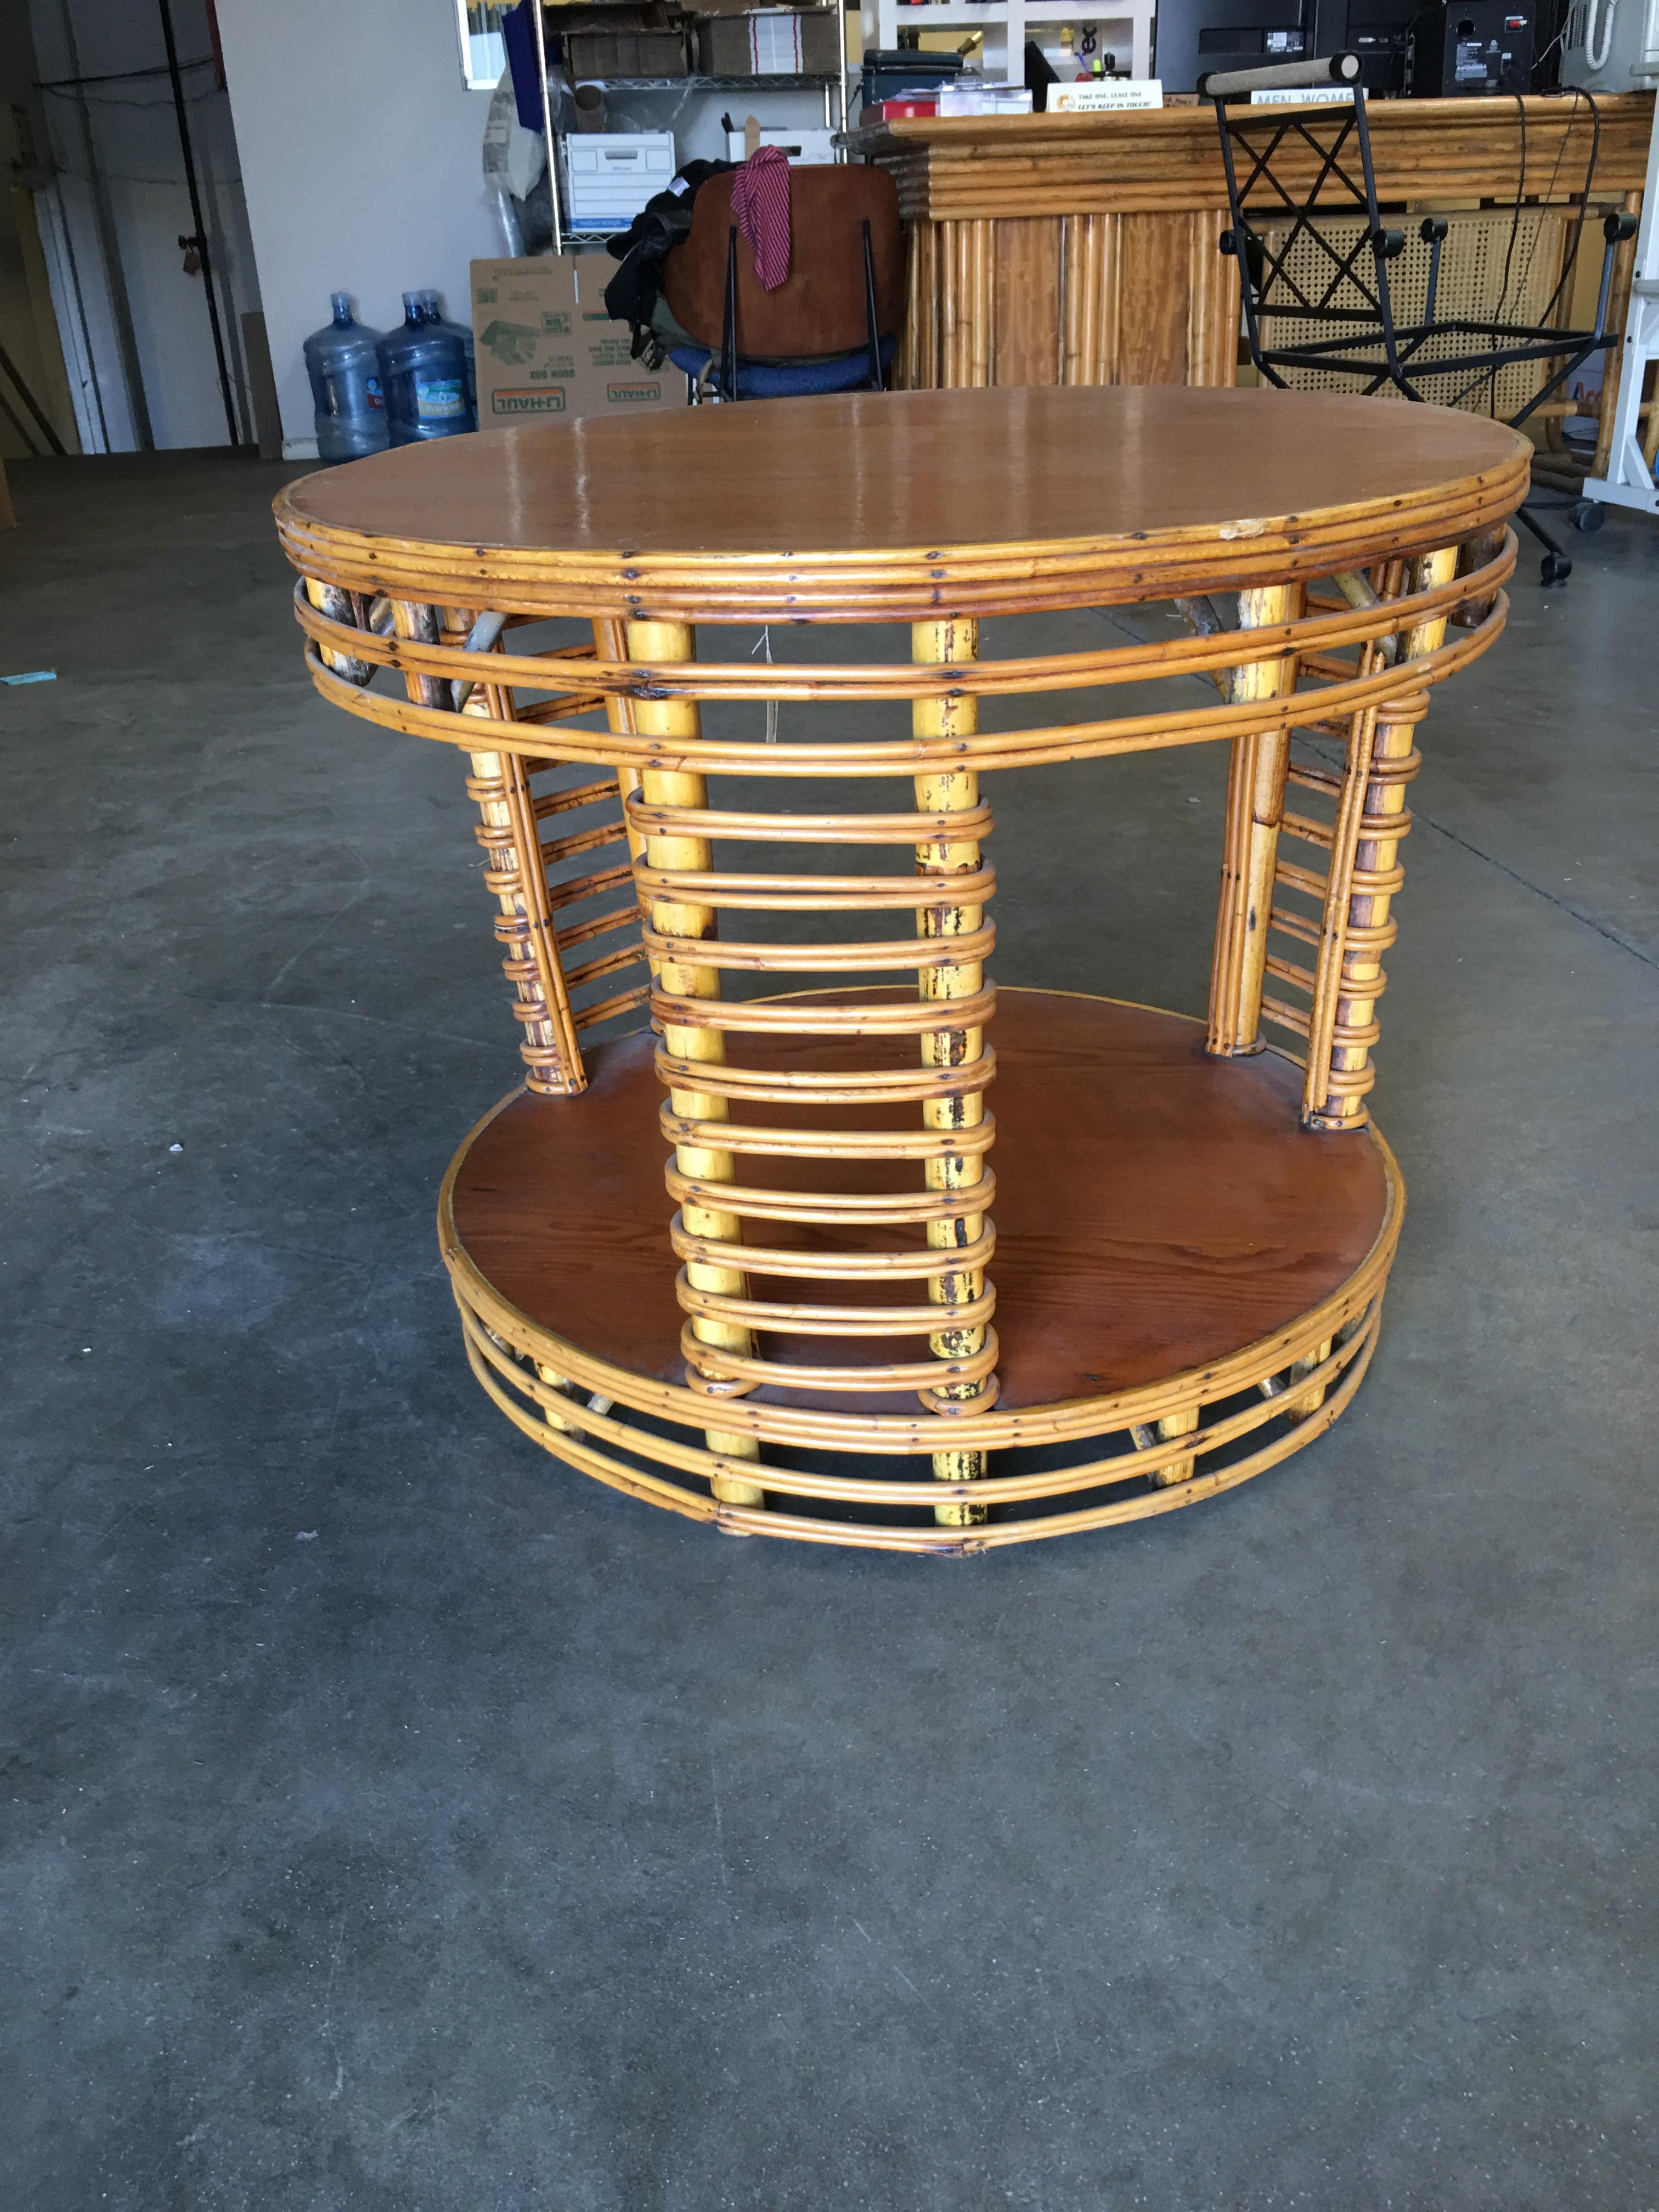 Art Deco Two-Tier Round Stick Rattan Coffee Table with Mahogany Top For Sale